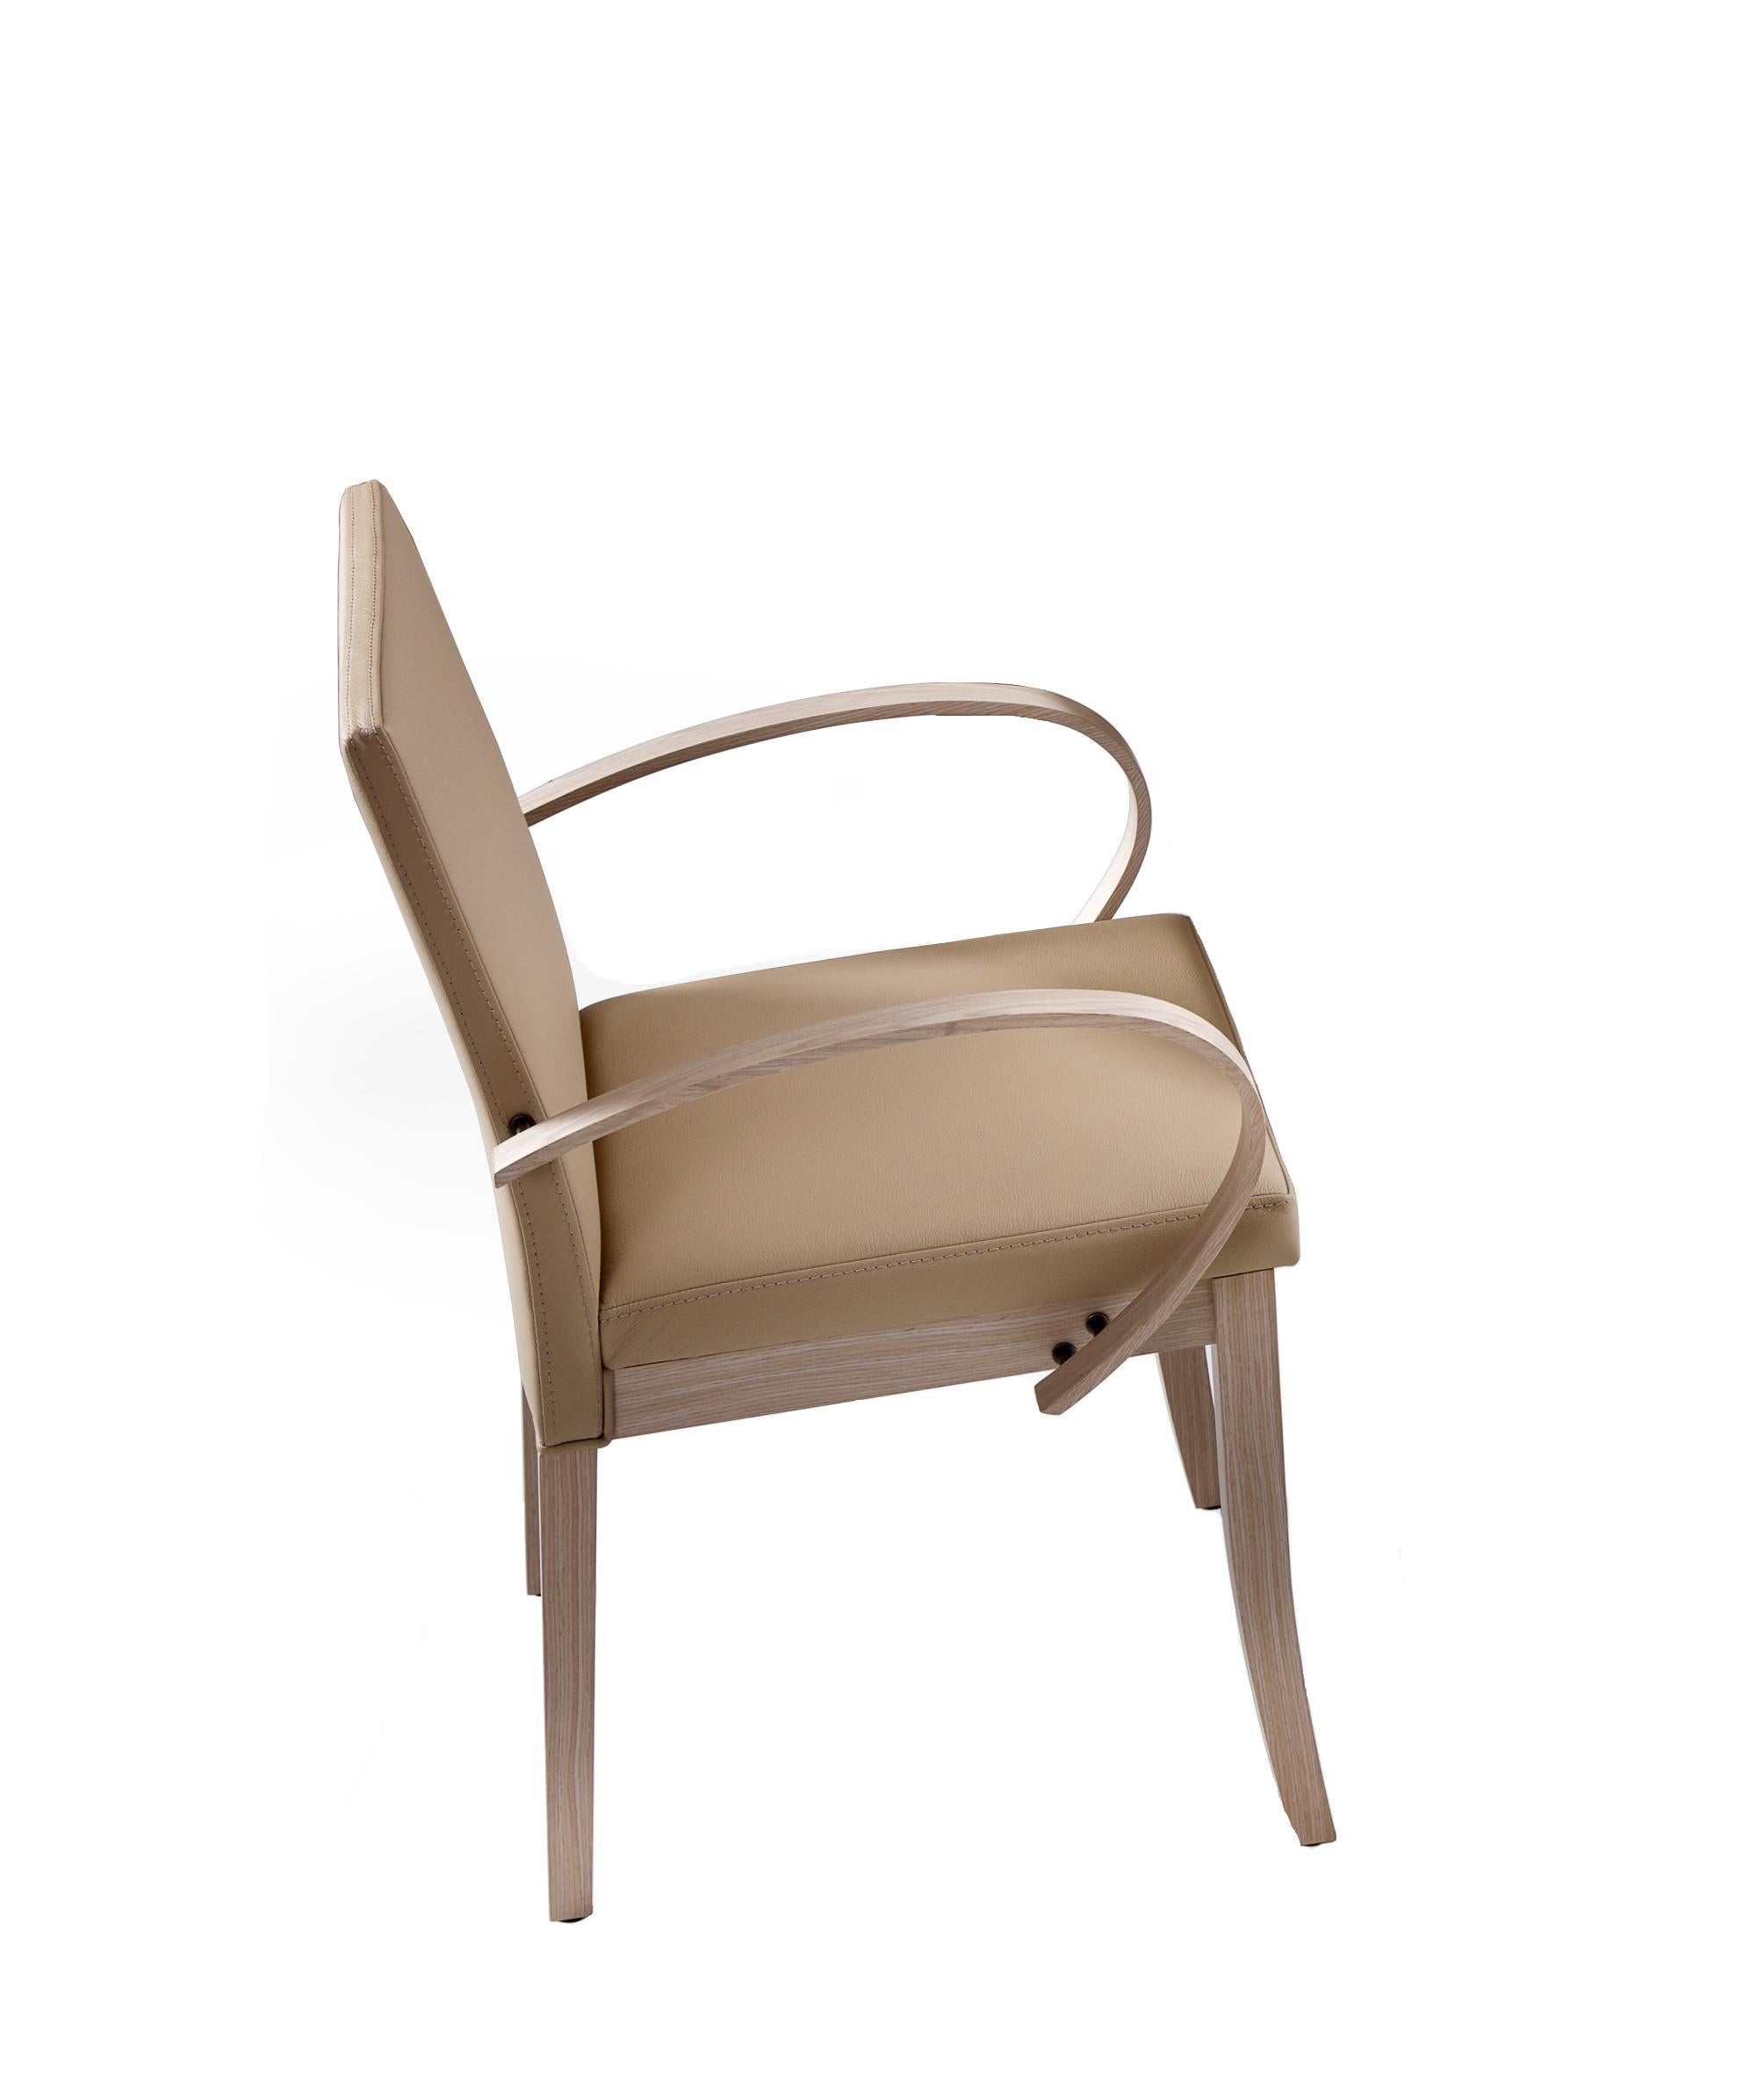 Modern Sisli Chair, Slightly Flared Leg and Slim Back Pair with an Exaggerated Curved For Sale